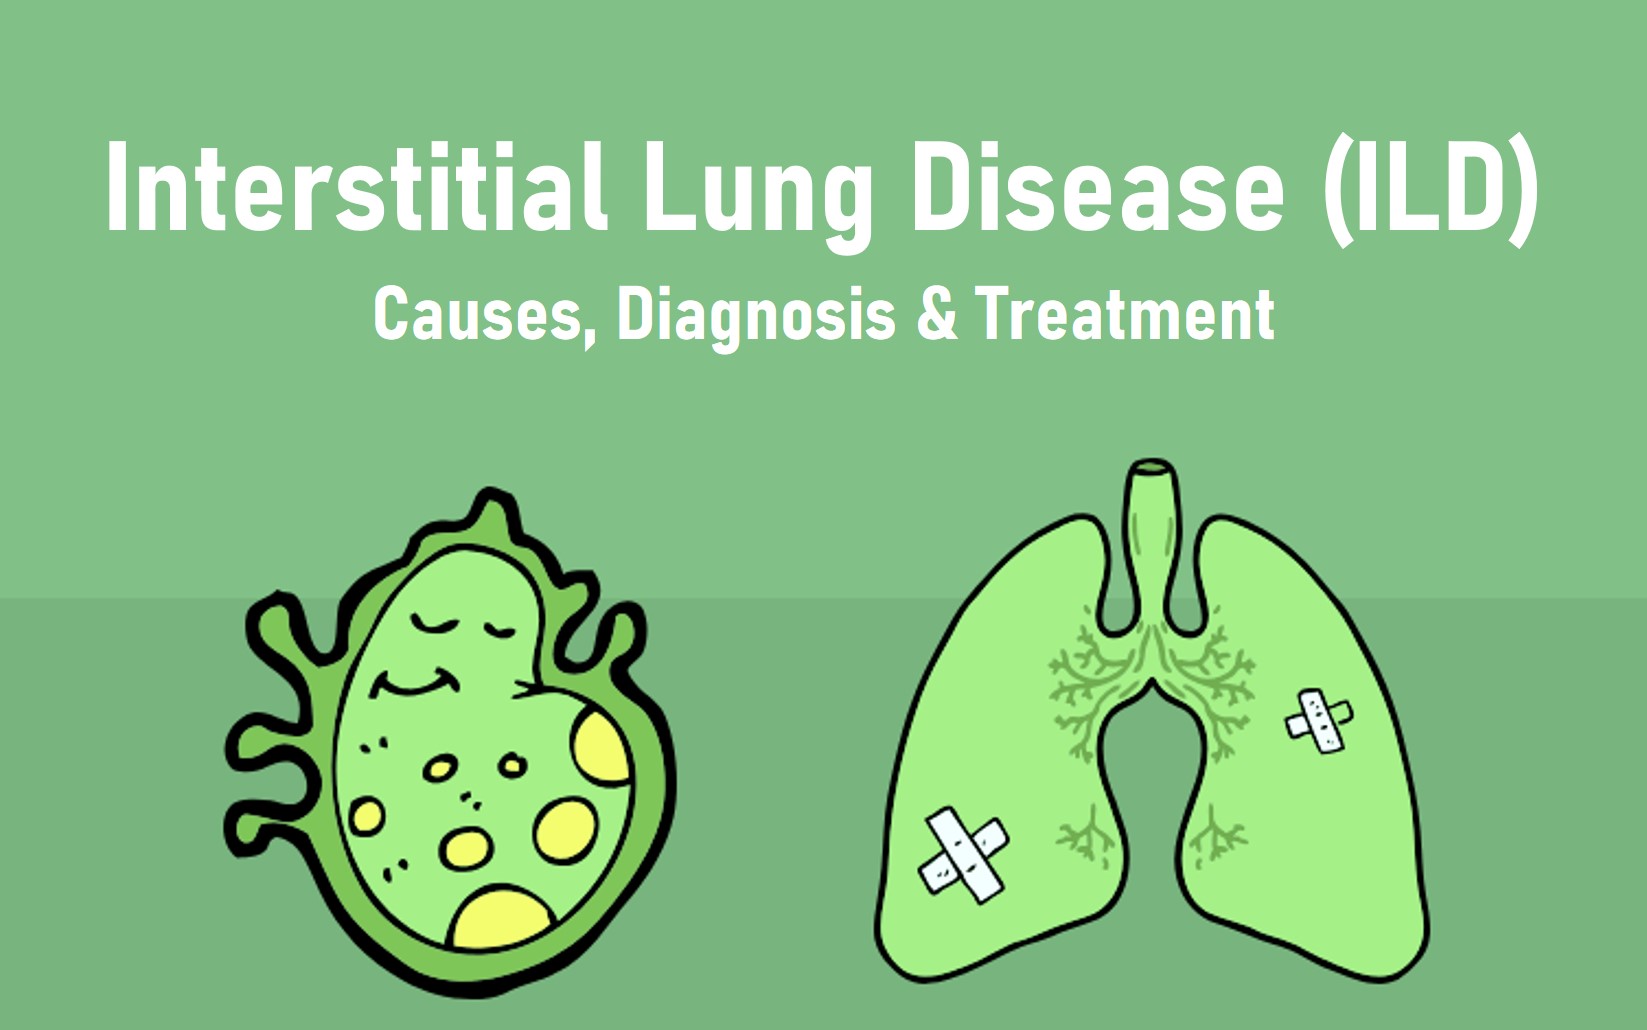 Interstitial Lung Disease – Causes, Diagnosis & Treatment